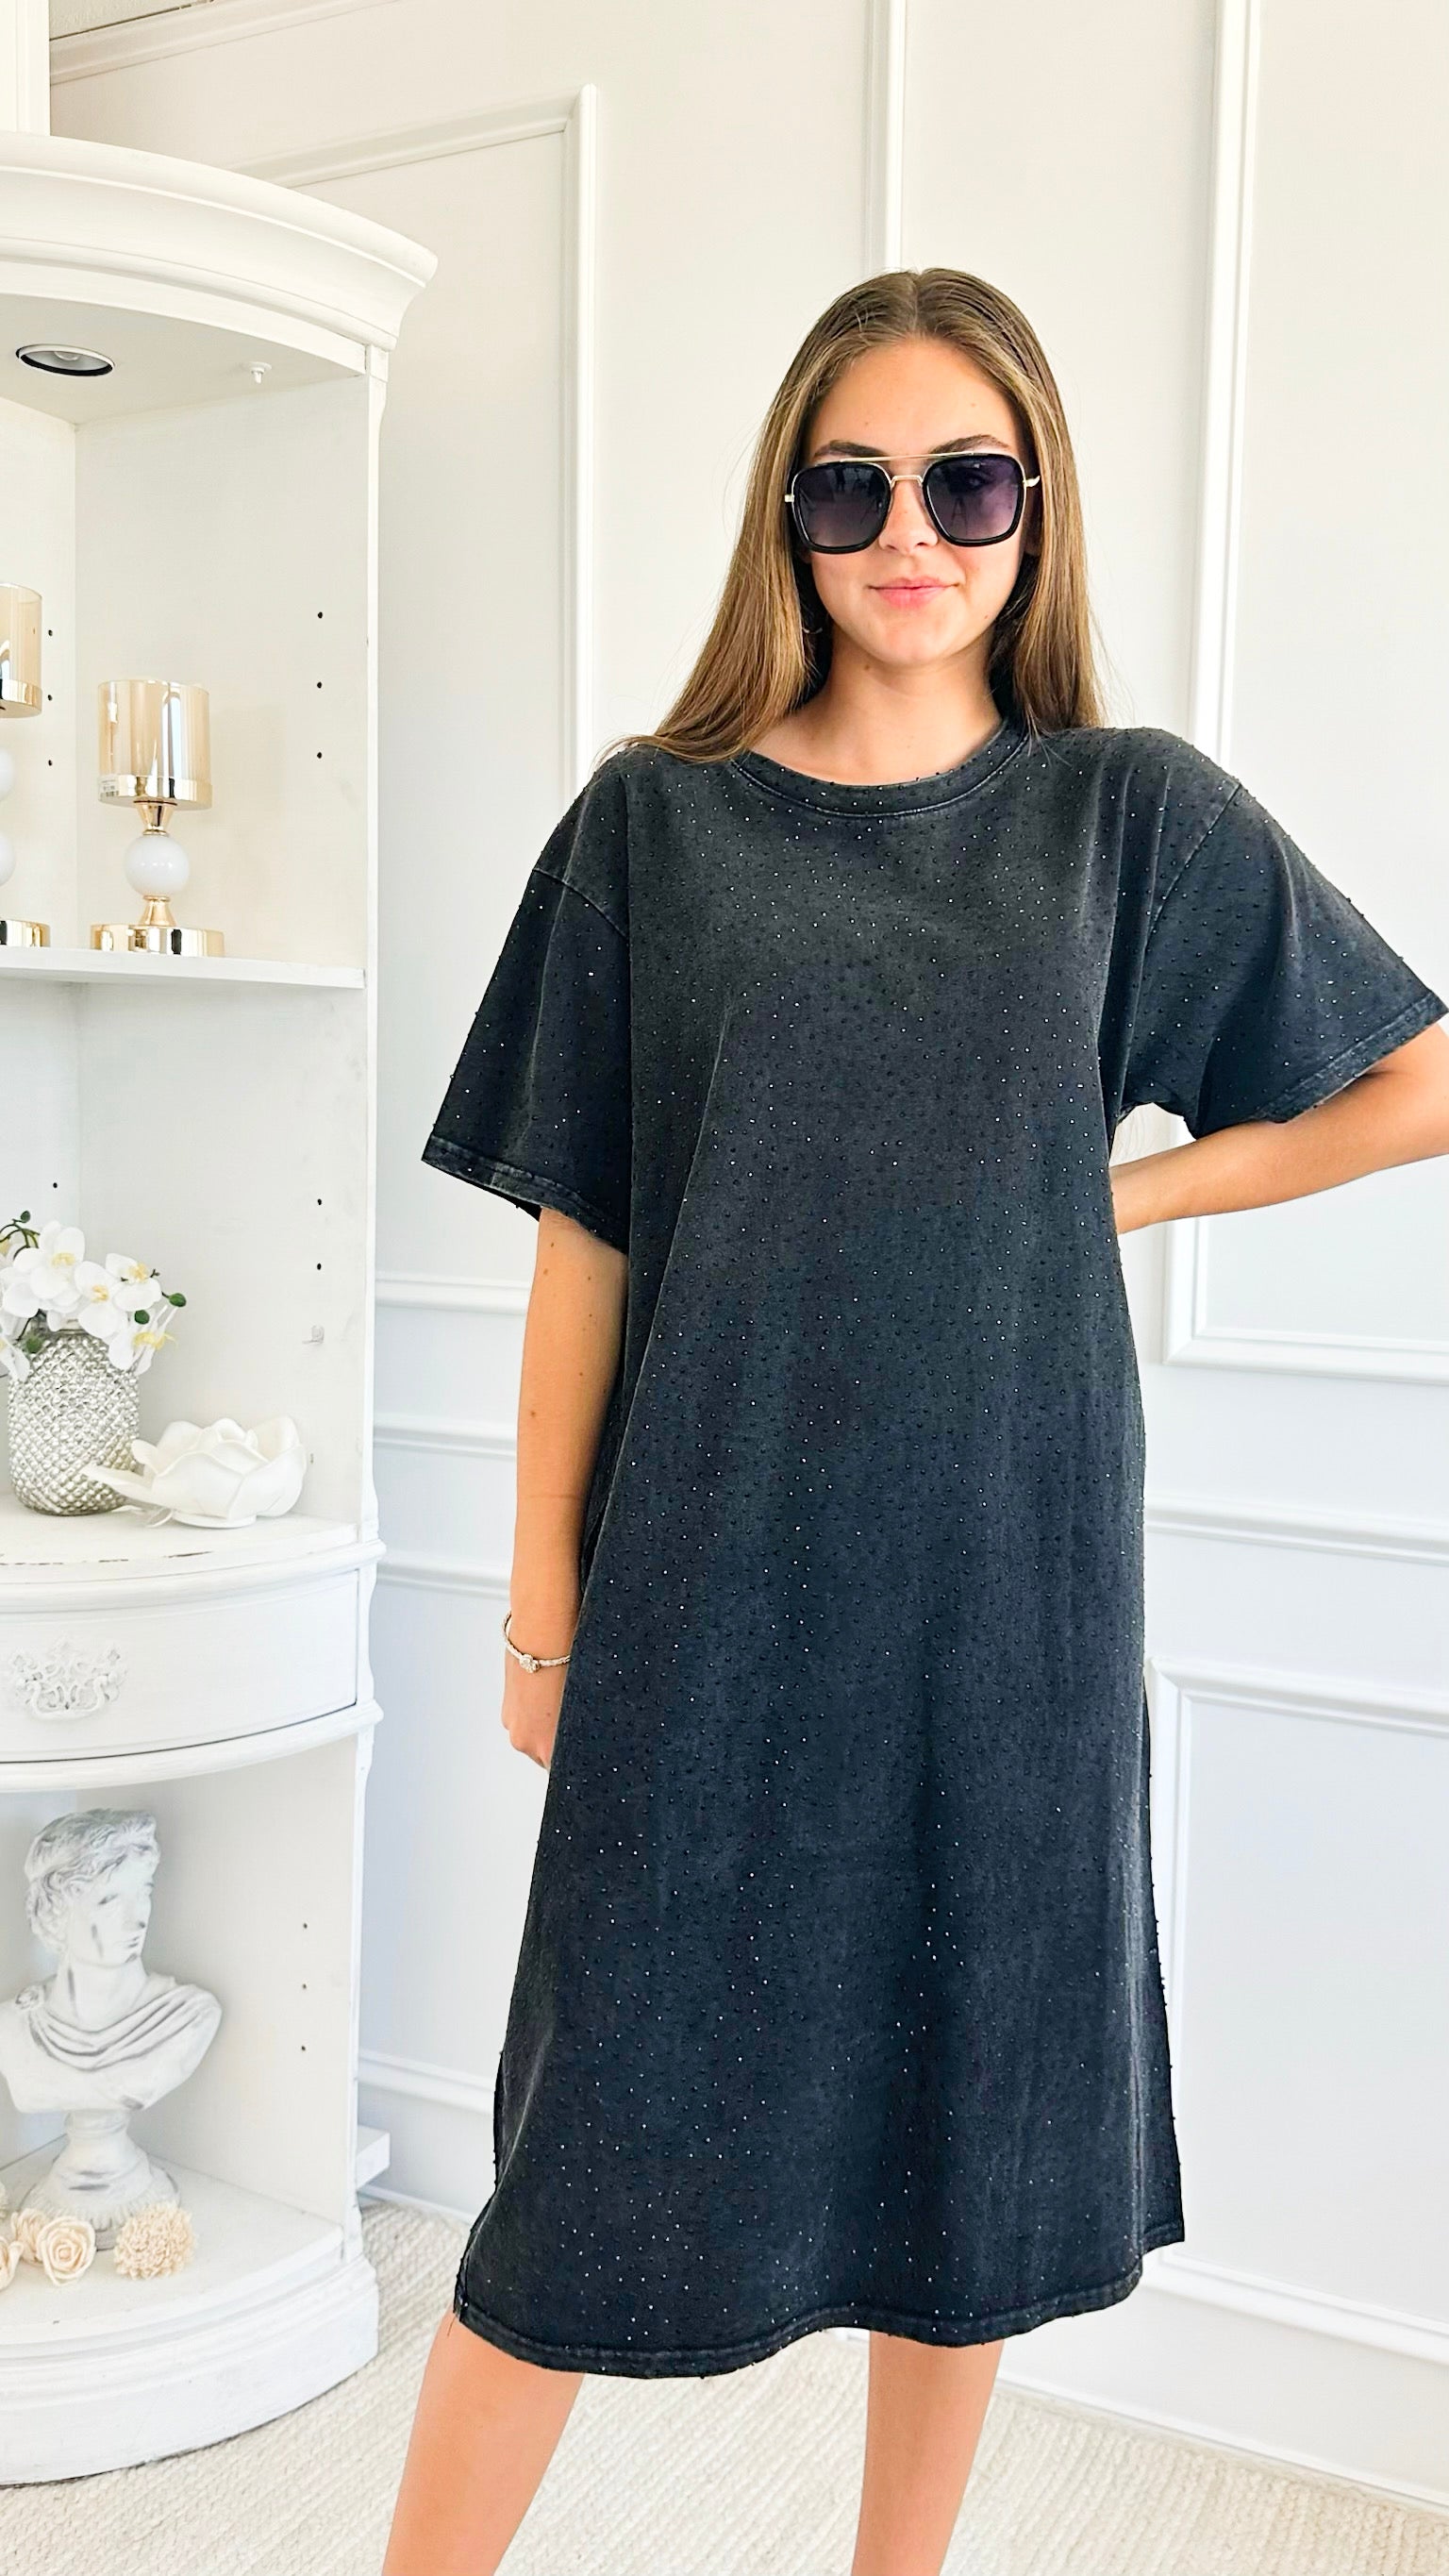 Rhinestone Detailed Oversized T-Shirt - Black-110 Short Sleeve Tops-Galita-Coastal Bloom Boutique, find the trendiest versions of the popular styles and looks Located in Indialantic, FL